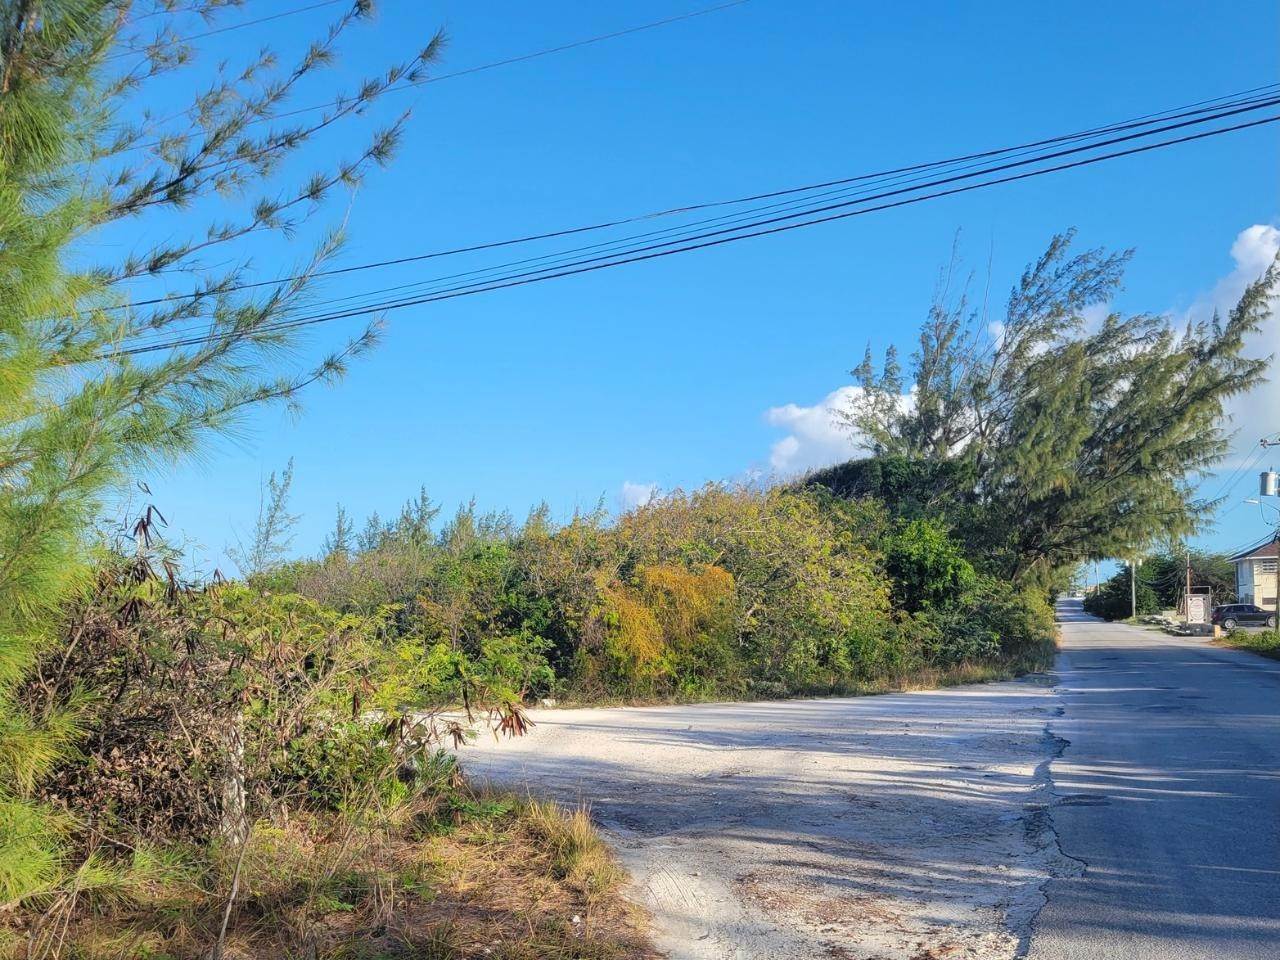 5. Lots / Acreage for Sale at Other Bahamas, Other Areas In The Bahamas, Bahamas